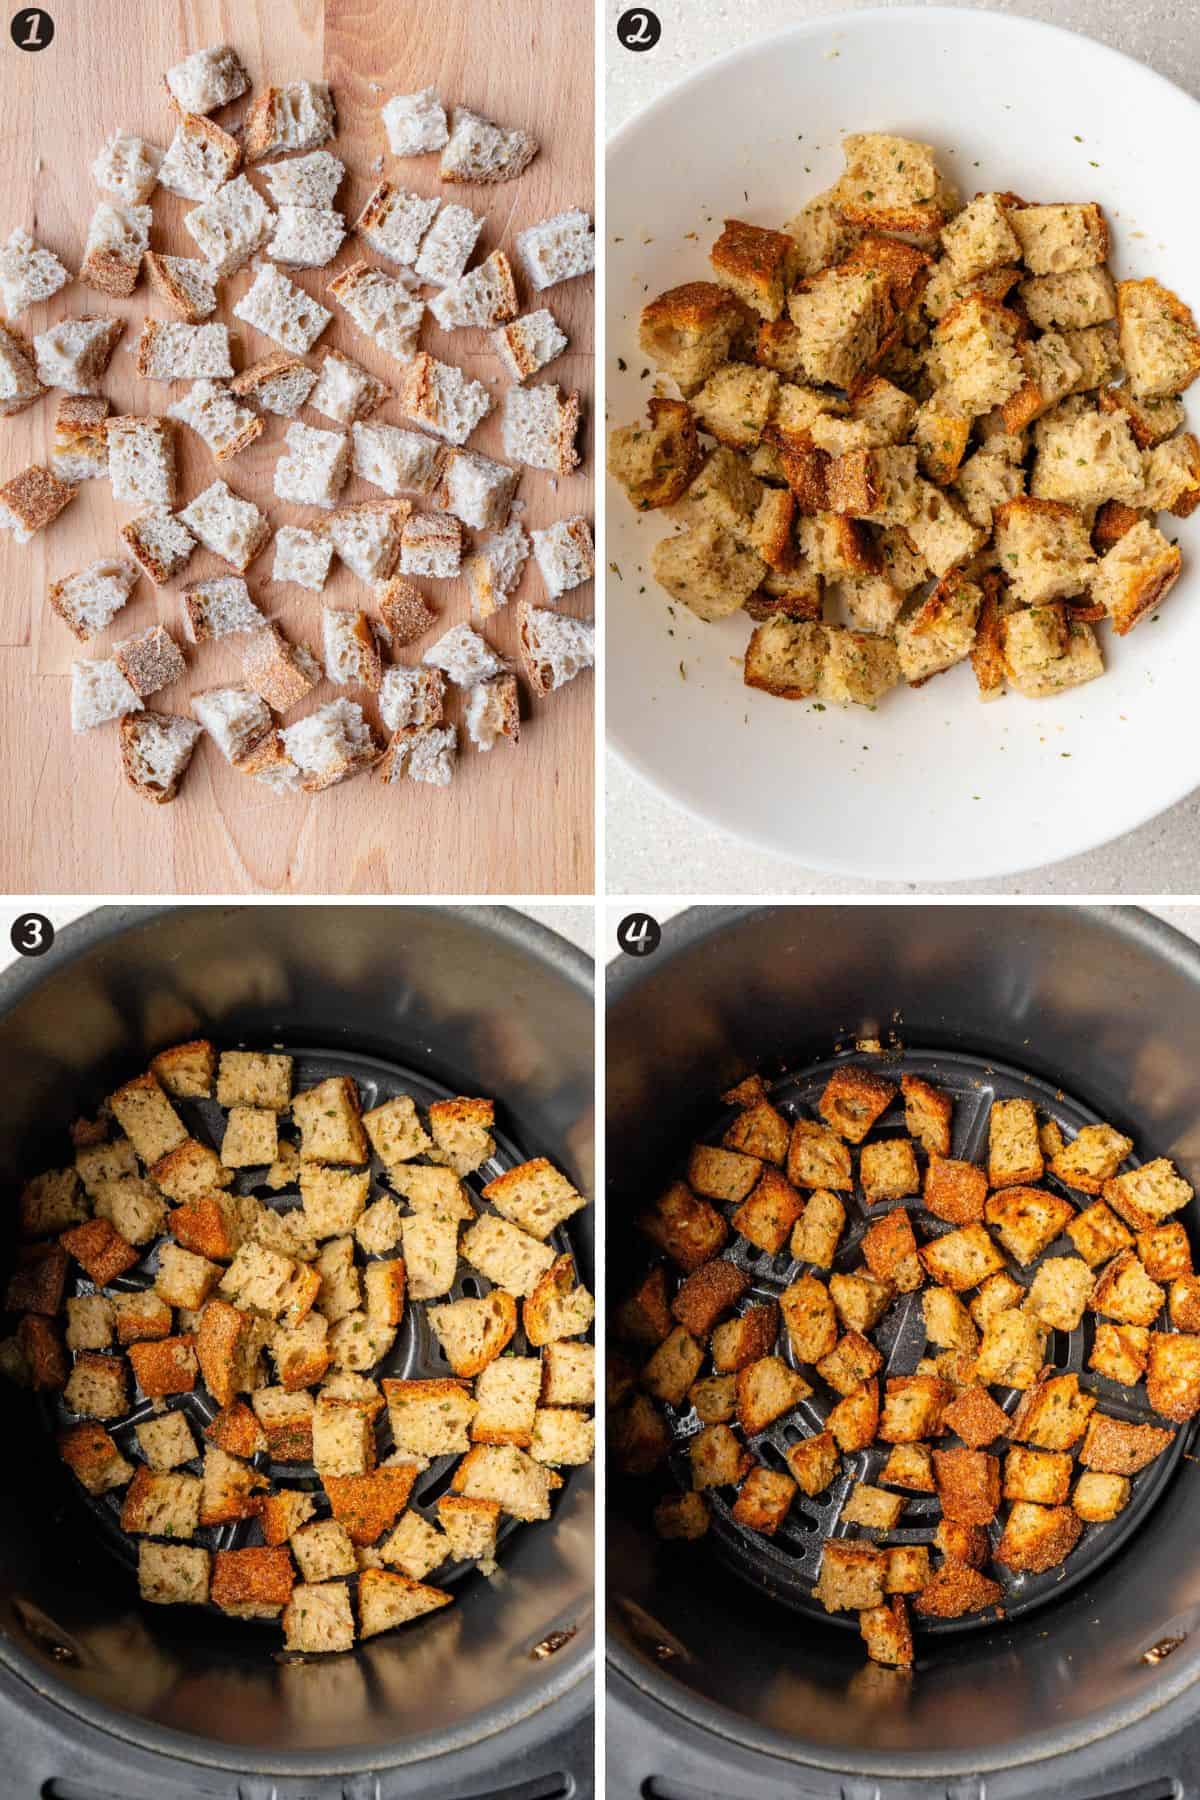 Steps on how to make air fryer croutons